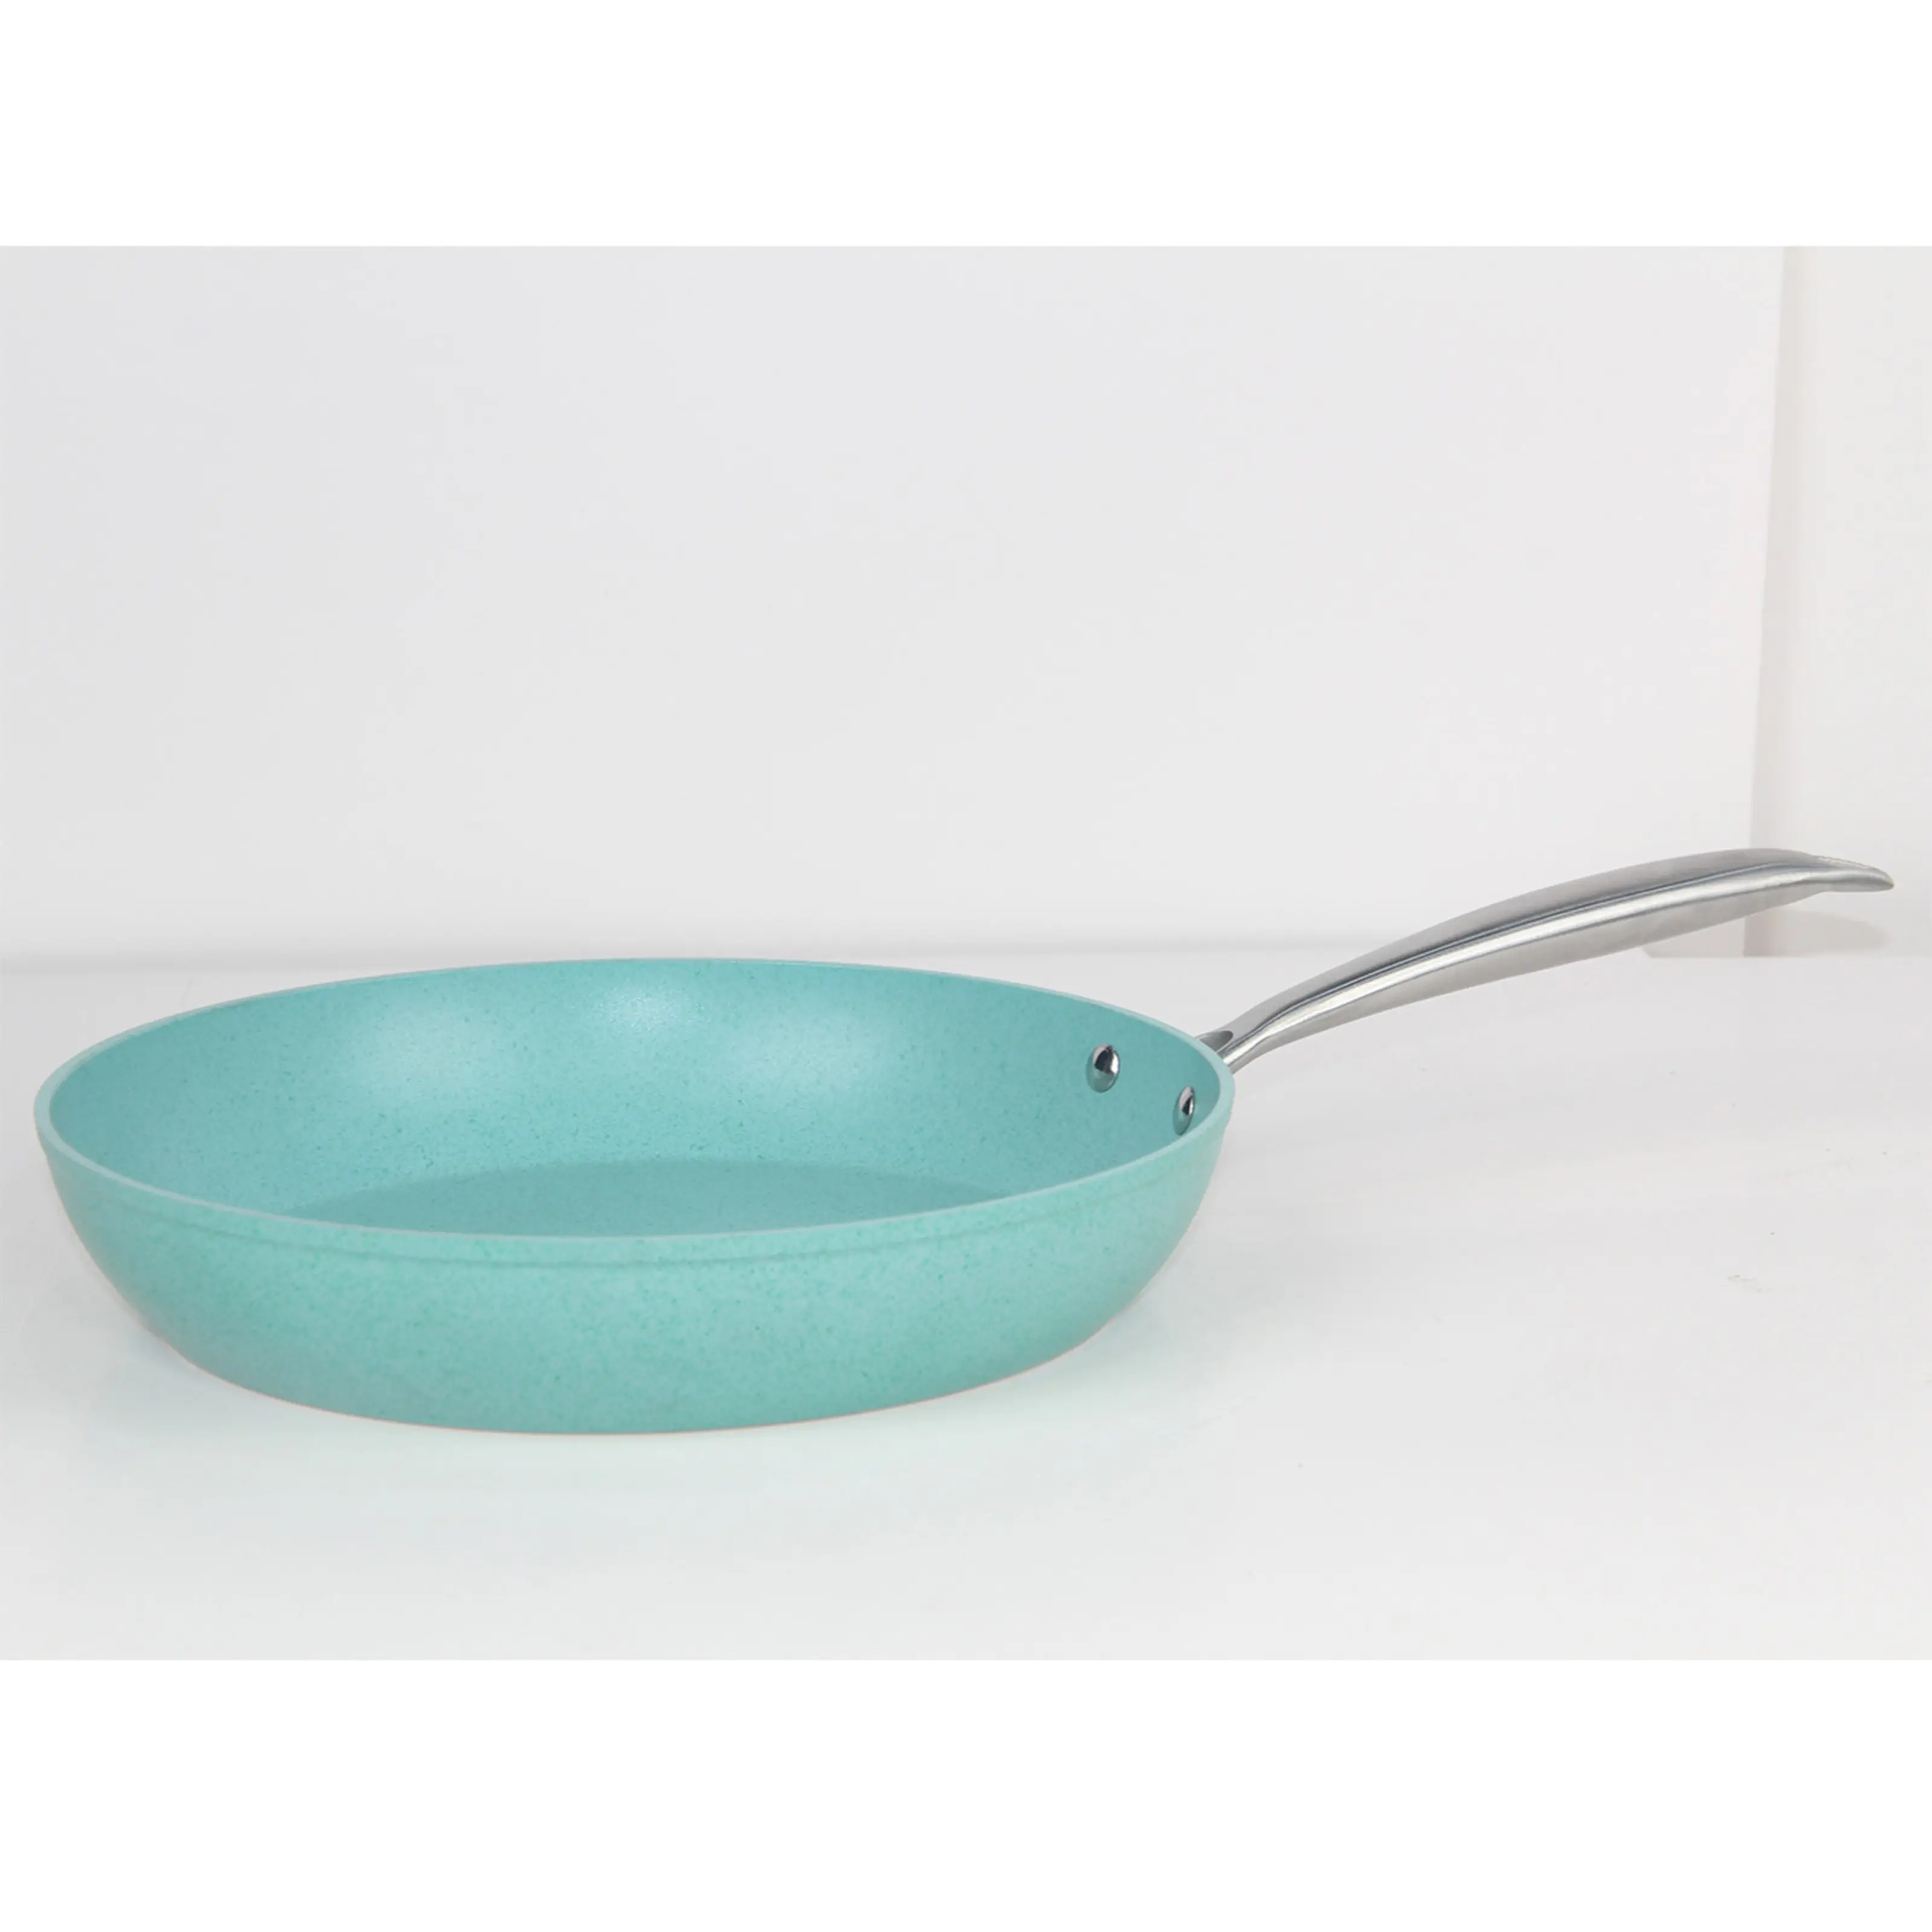 2022 Aluminum forged marble green coated frying pan with stainless steel handles